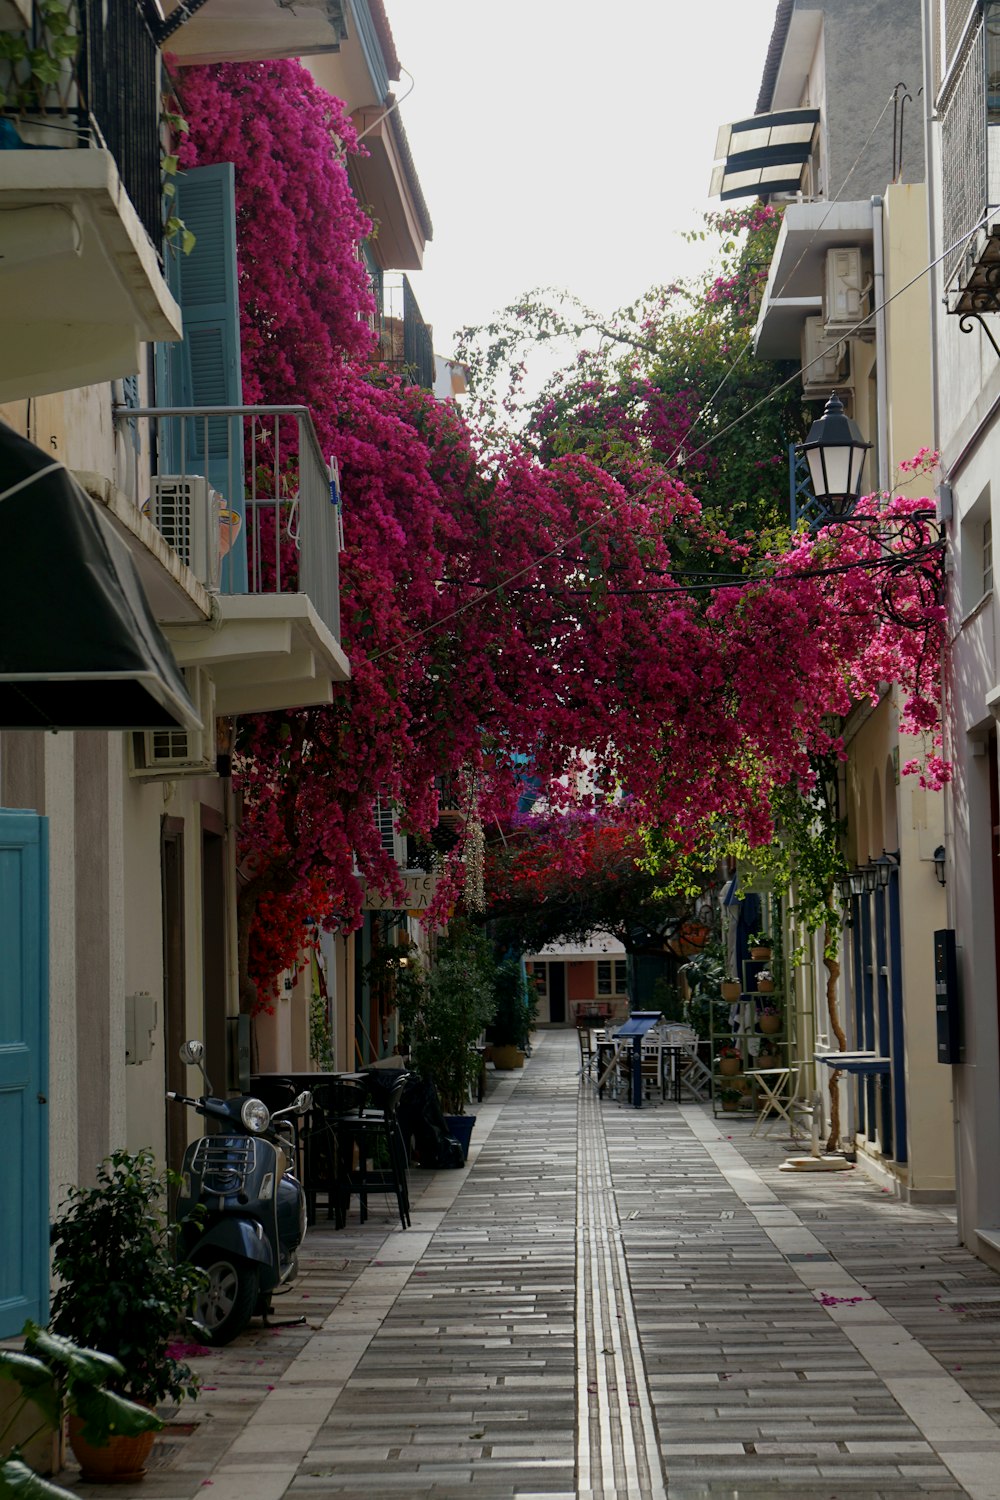 a street lined with buildings and trees with pink flowers